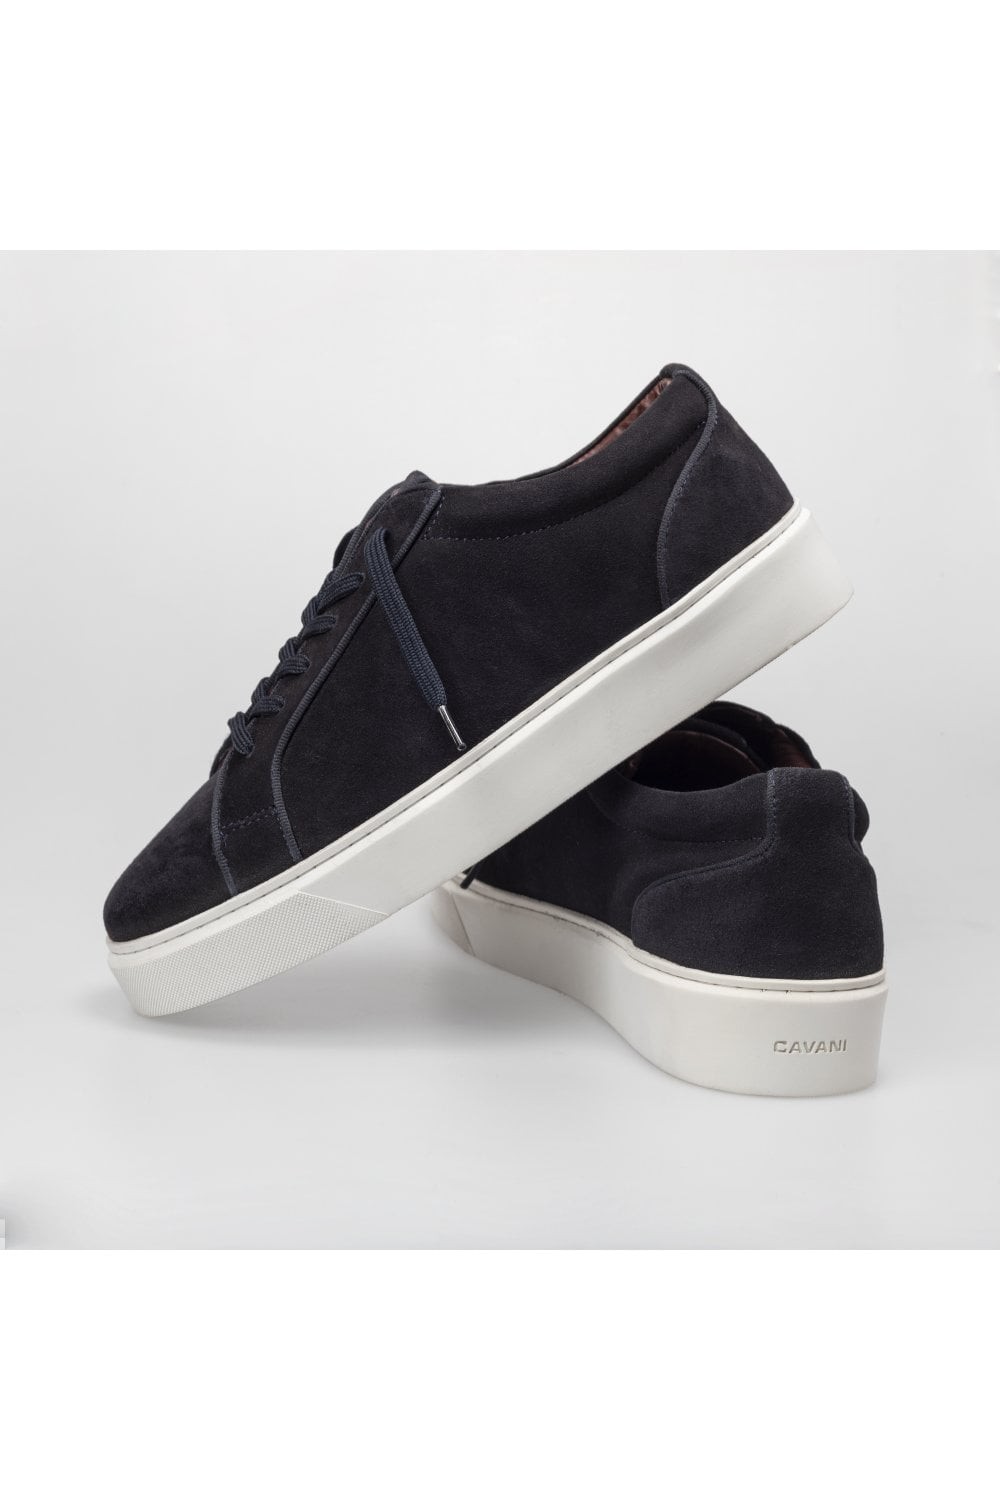 Men's Thick Rubber Sole Lace Up Sneakers - Navy Blue